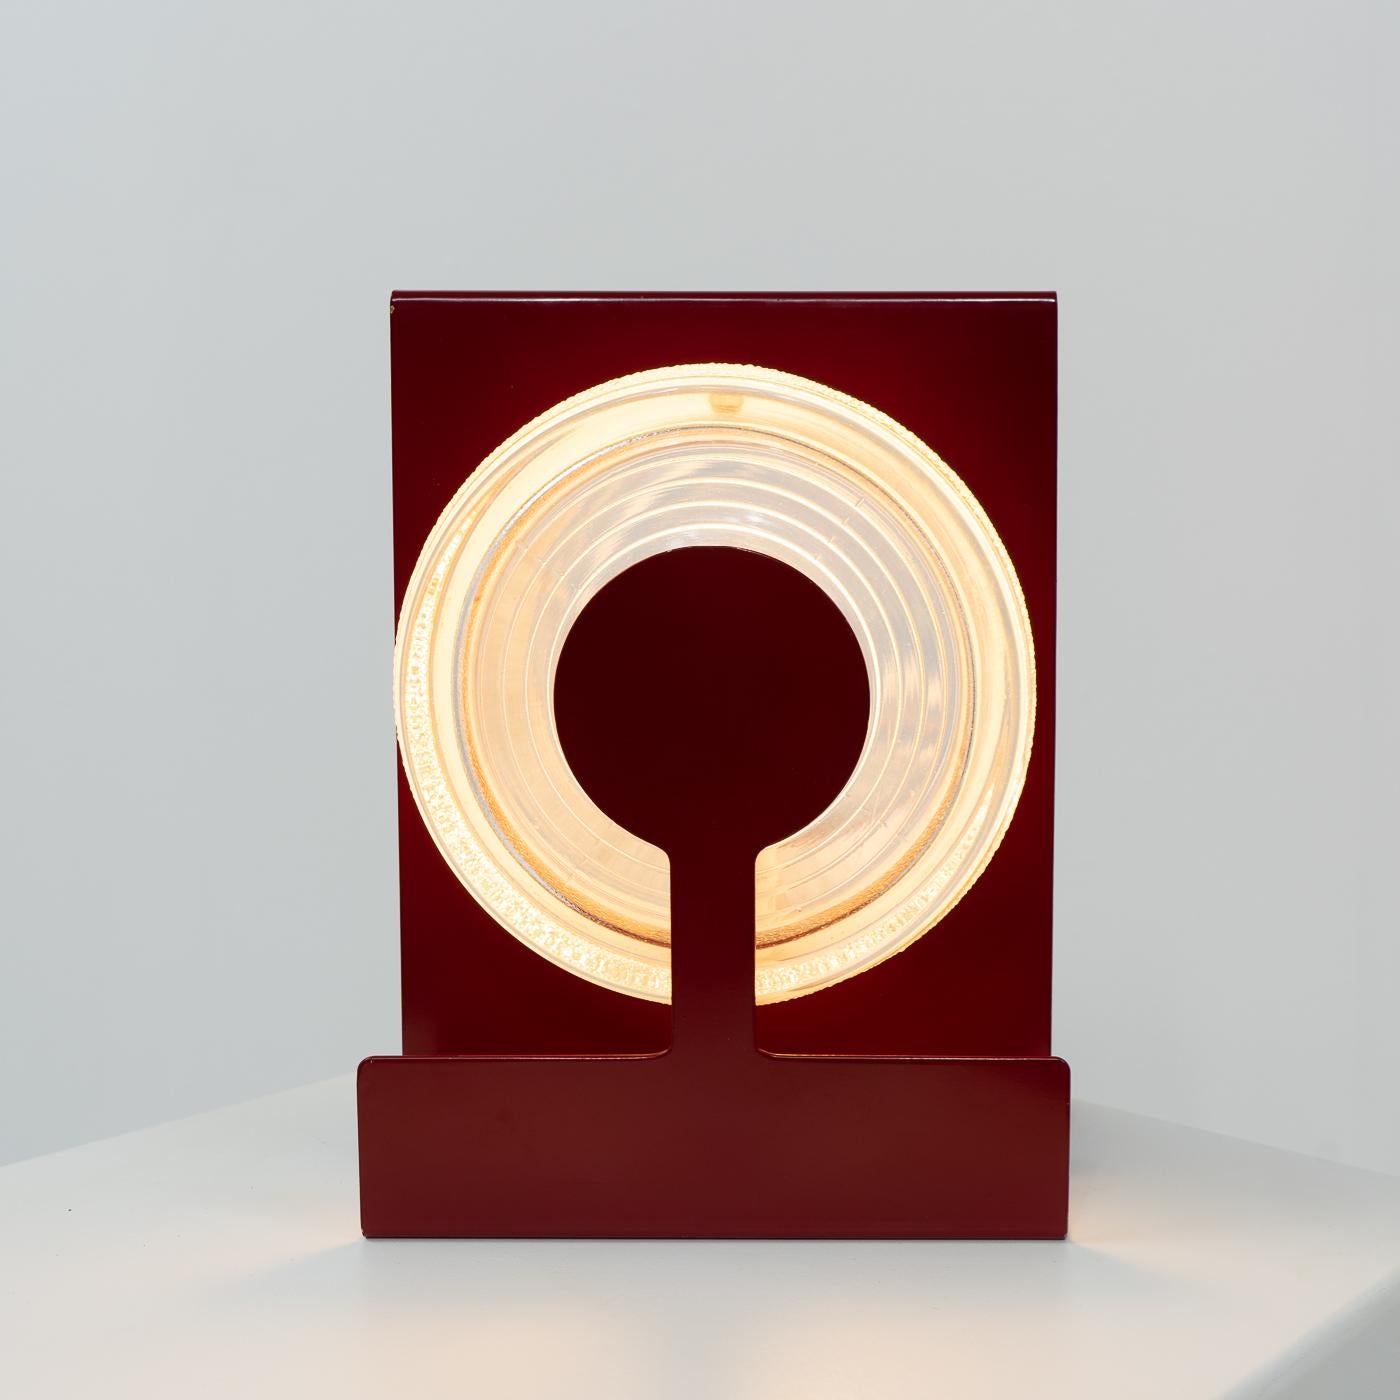 Table lamp named “Yoyo”, consisting of a red coated metal structure with two round glass inserts:

This lamp originates from the 1970s and was produced in Italy. The design is attributed to Eugenio Gentili Tedeschi and produced by Fontana Arte.